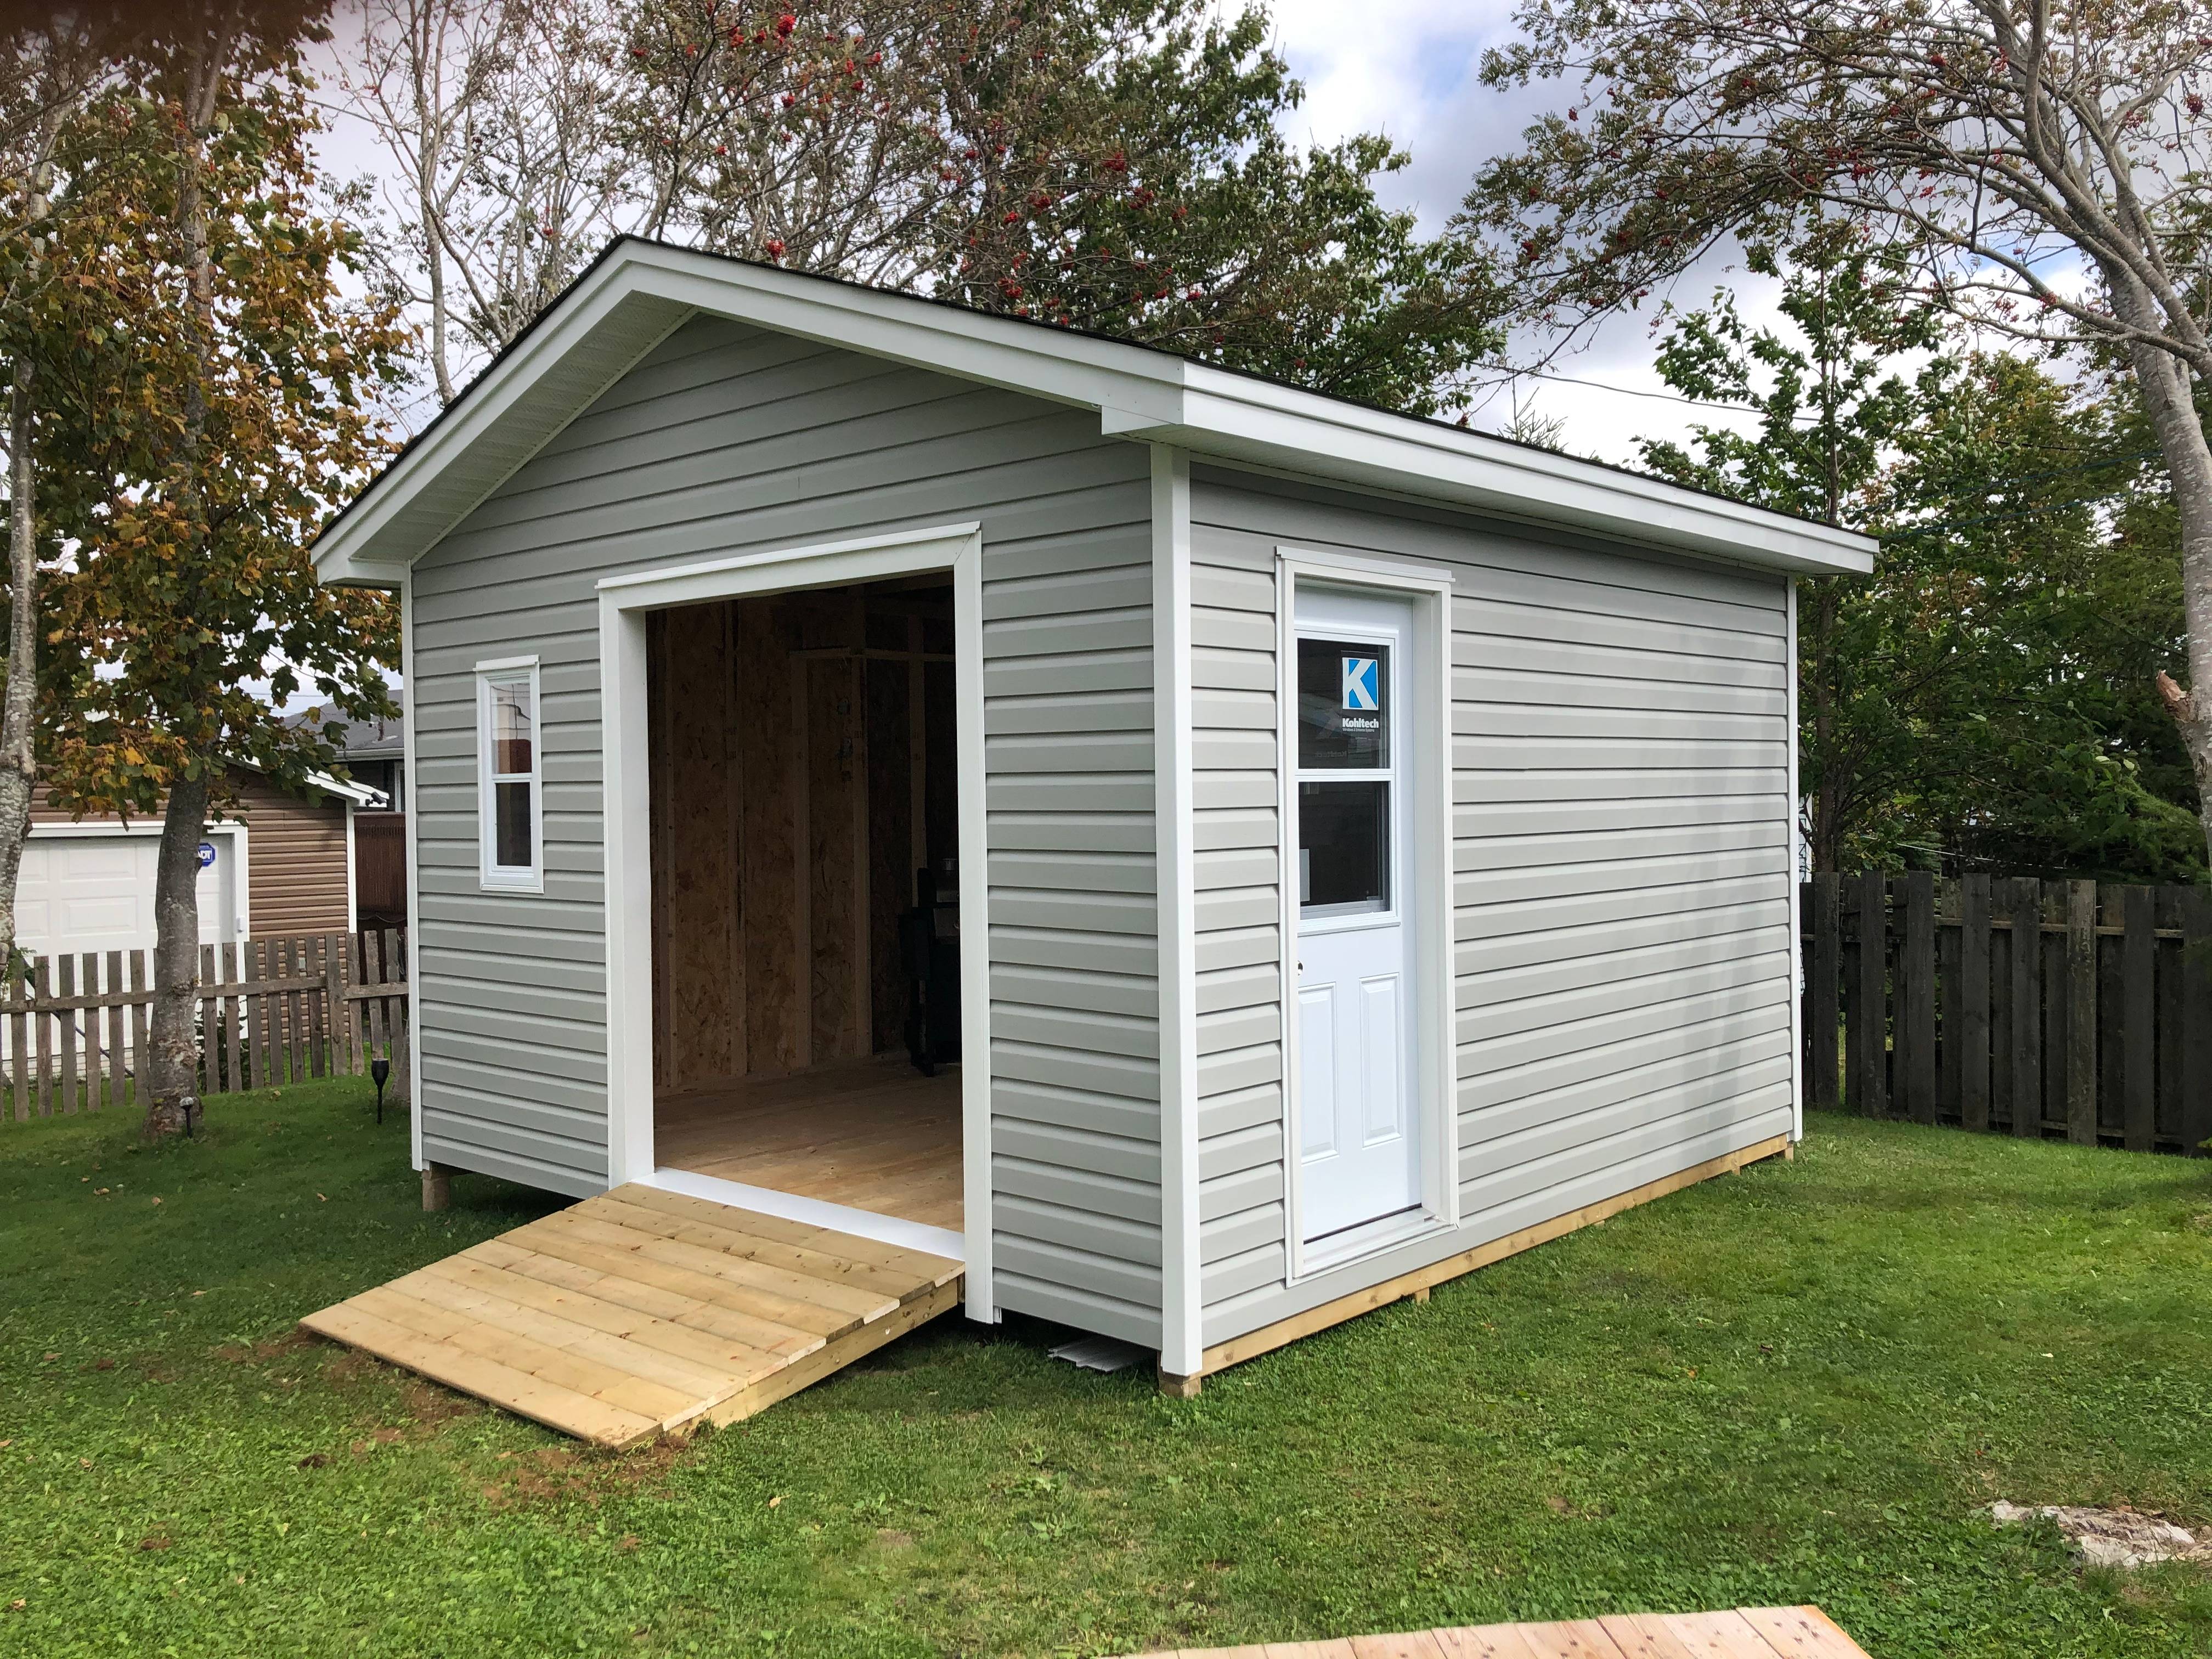 14' x 14' Standard Shed